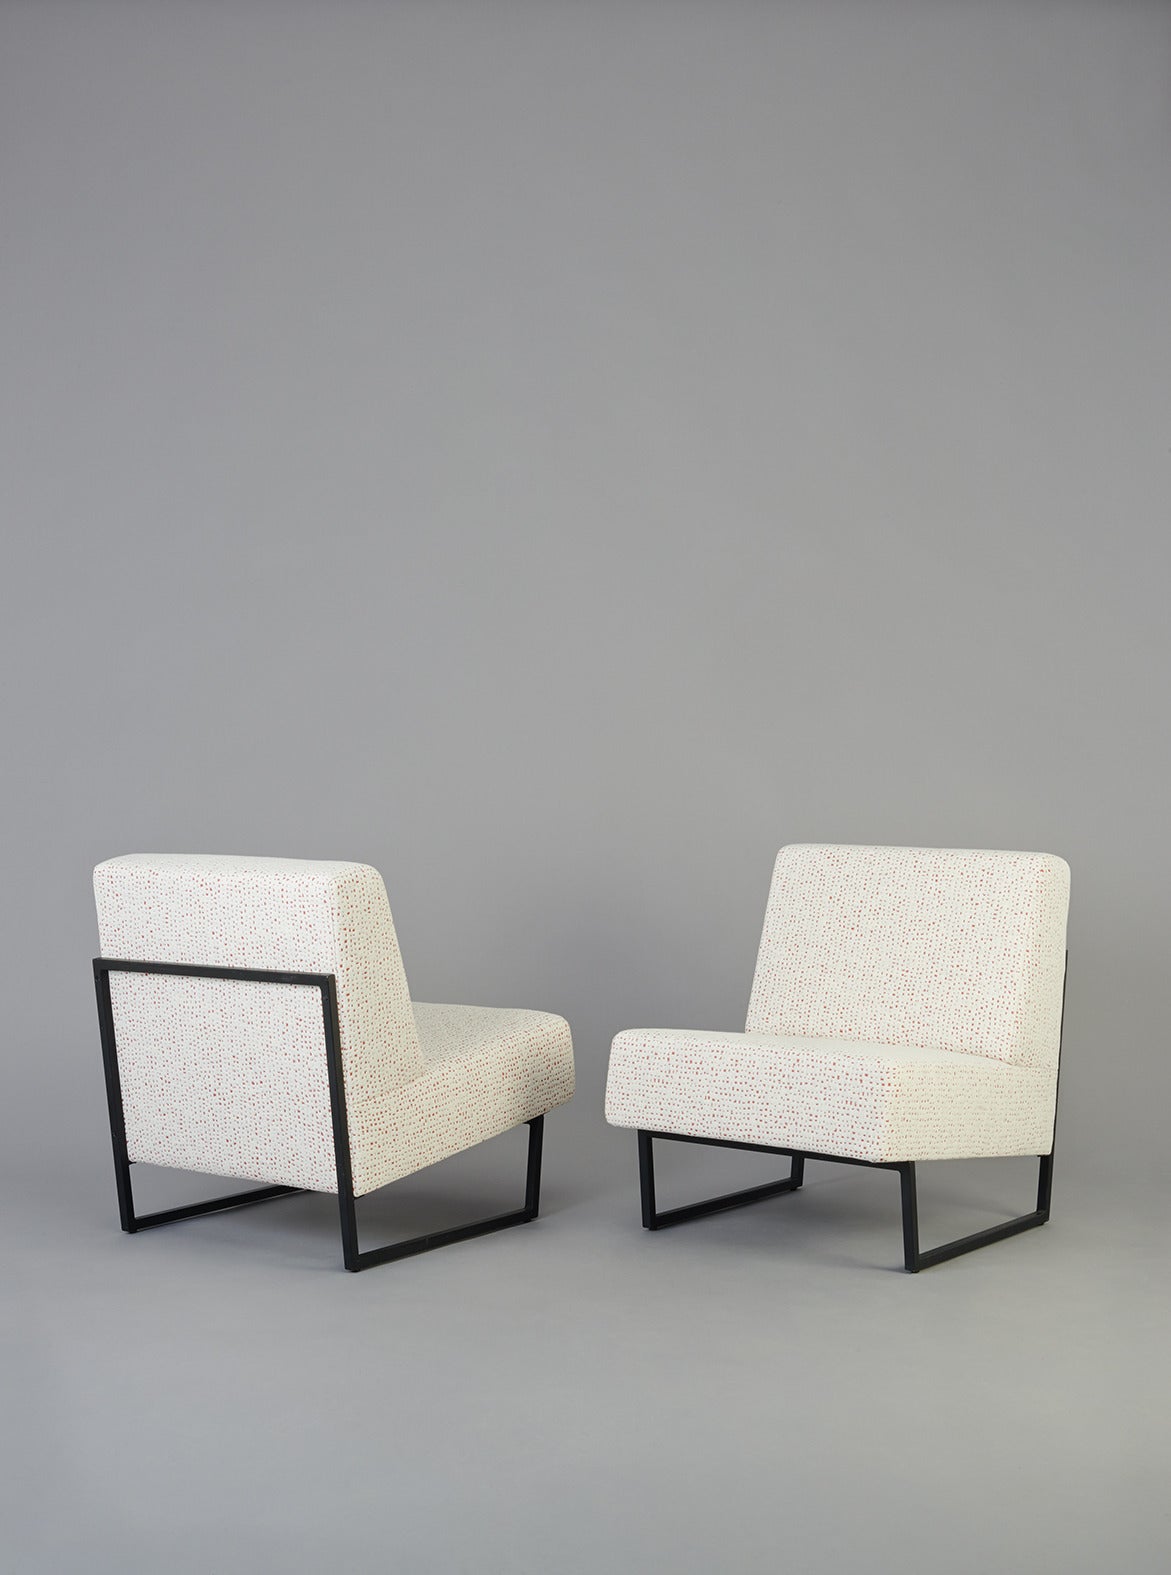 Lacquered Pair of Chairs FG2 by Pierre Guariche, Sieges Temoins Edition, circa 1959-1960